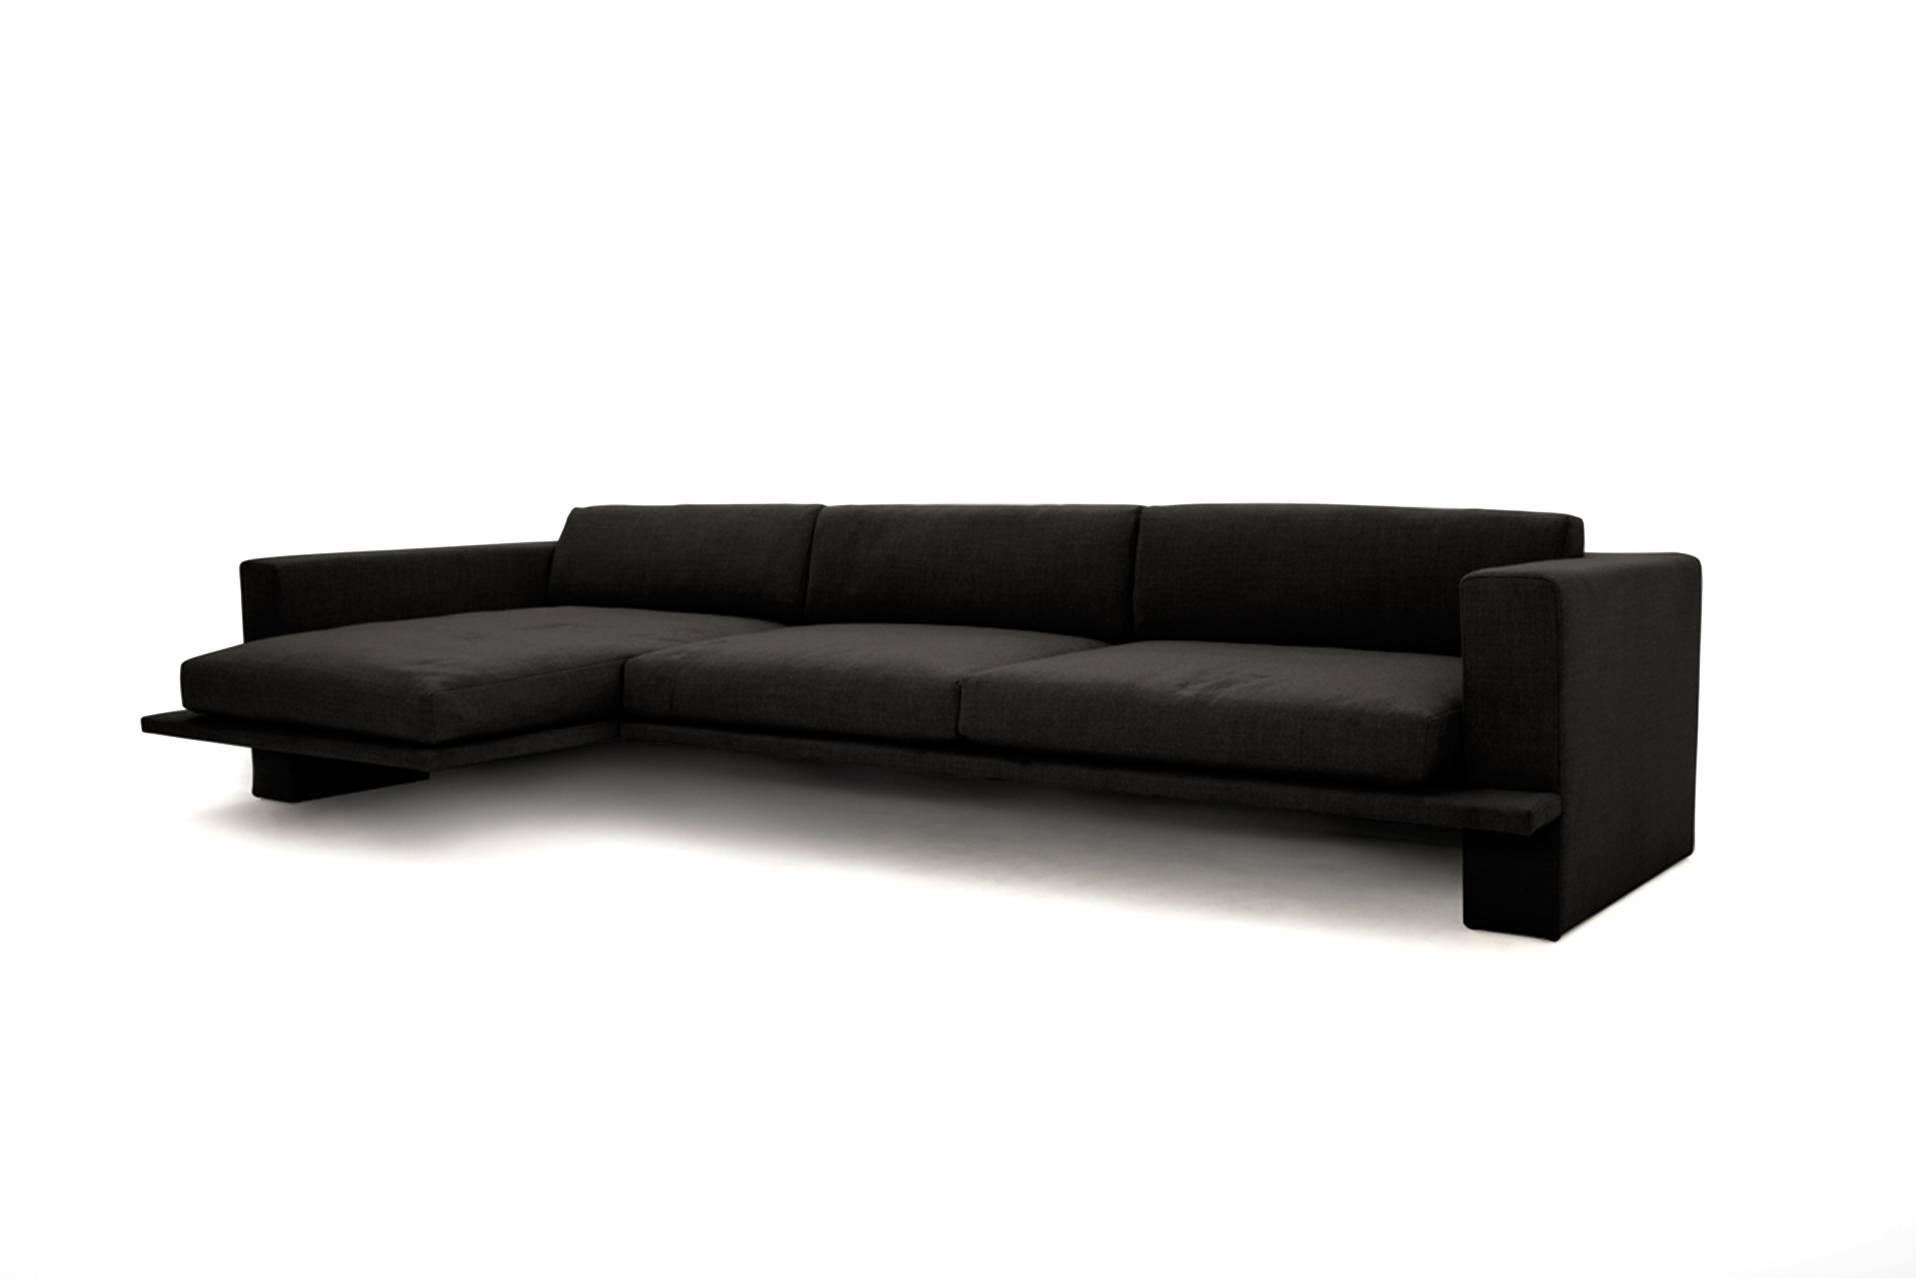 American Palisades Sectional Sofa LAXseries by MASHstudios For Sale